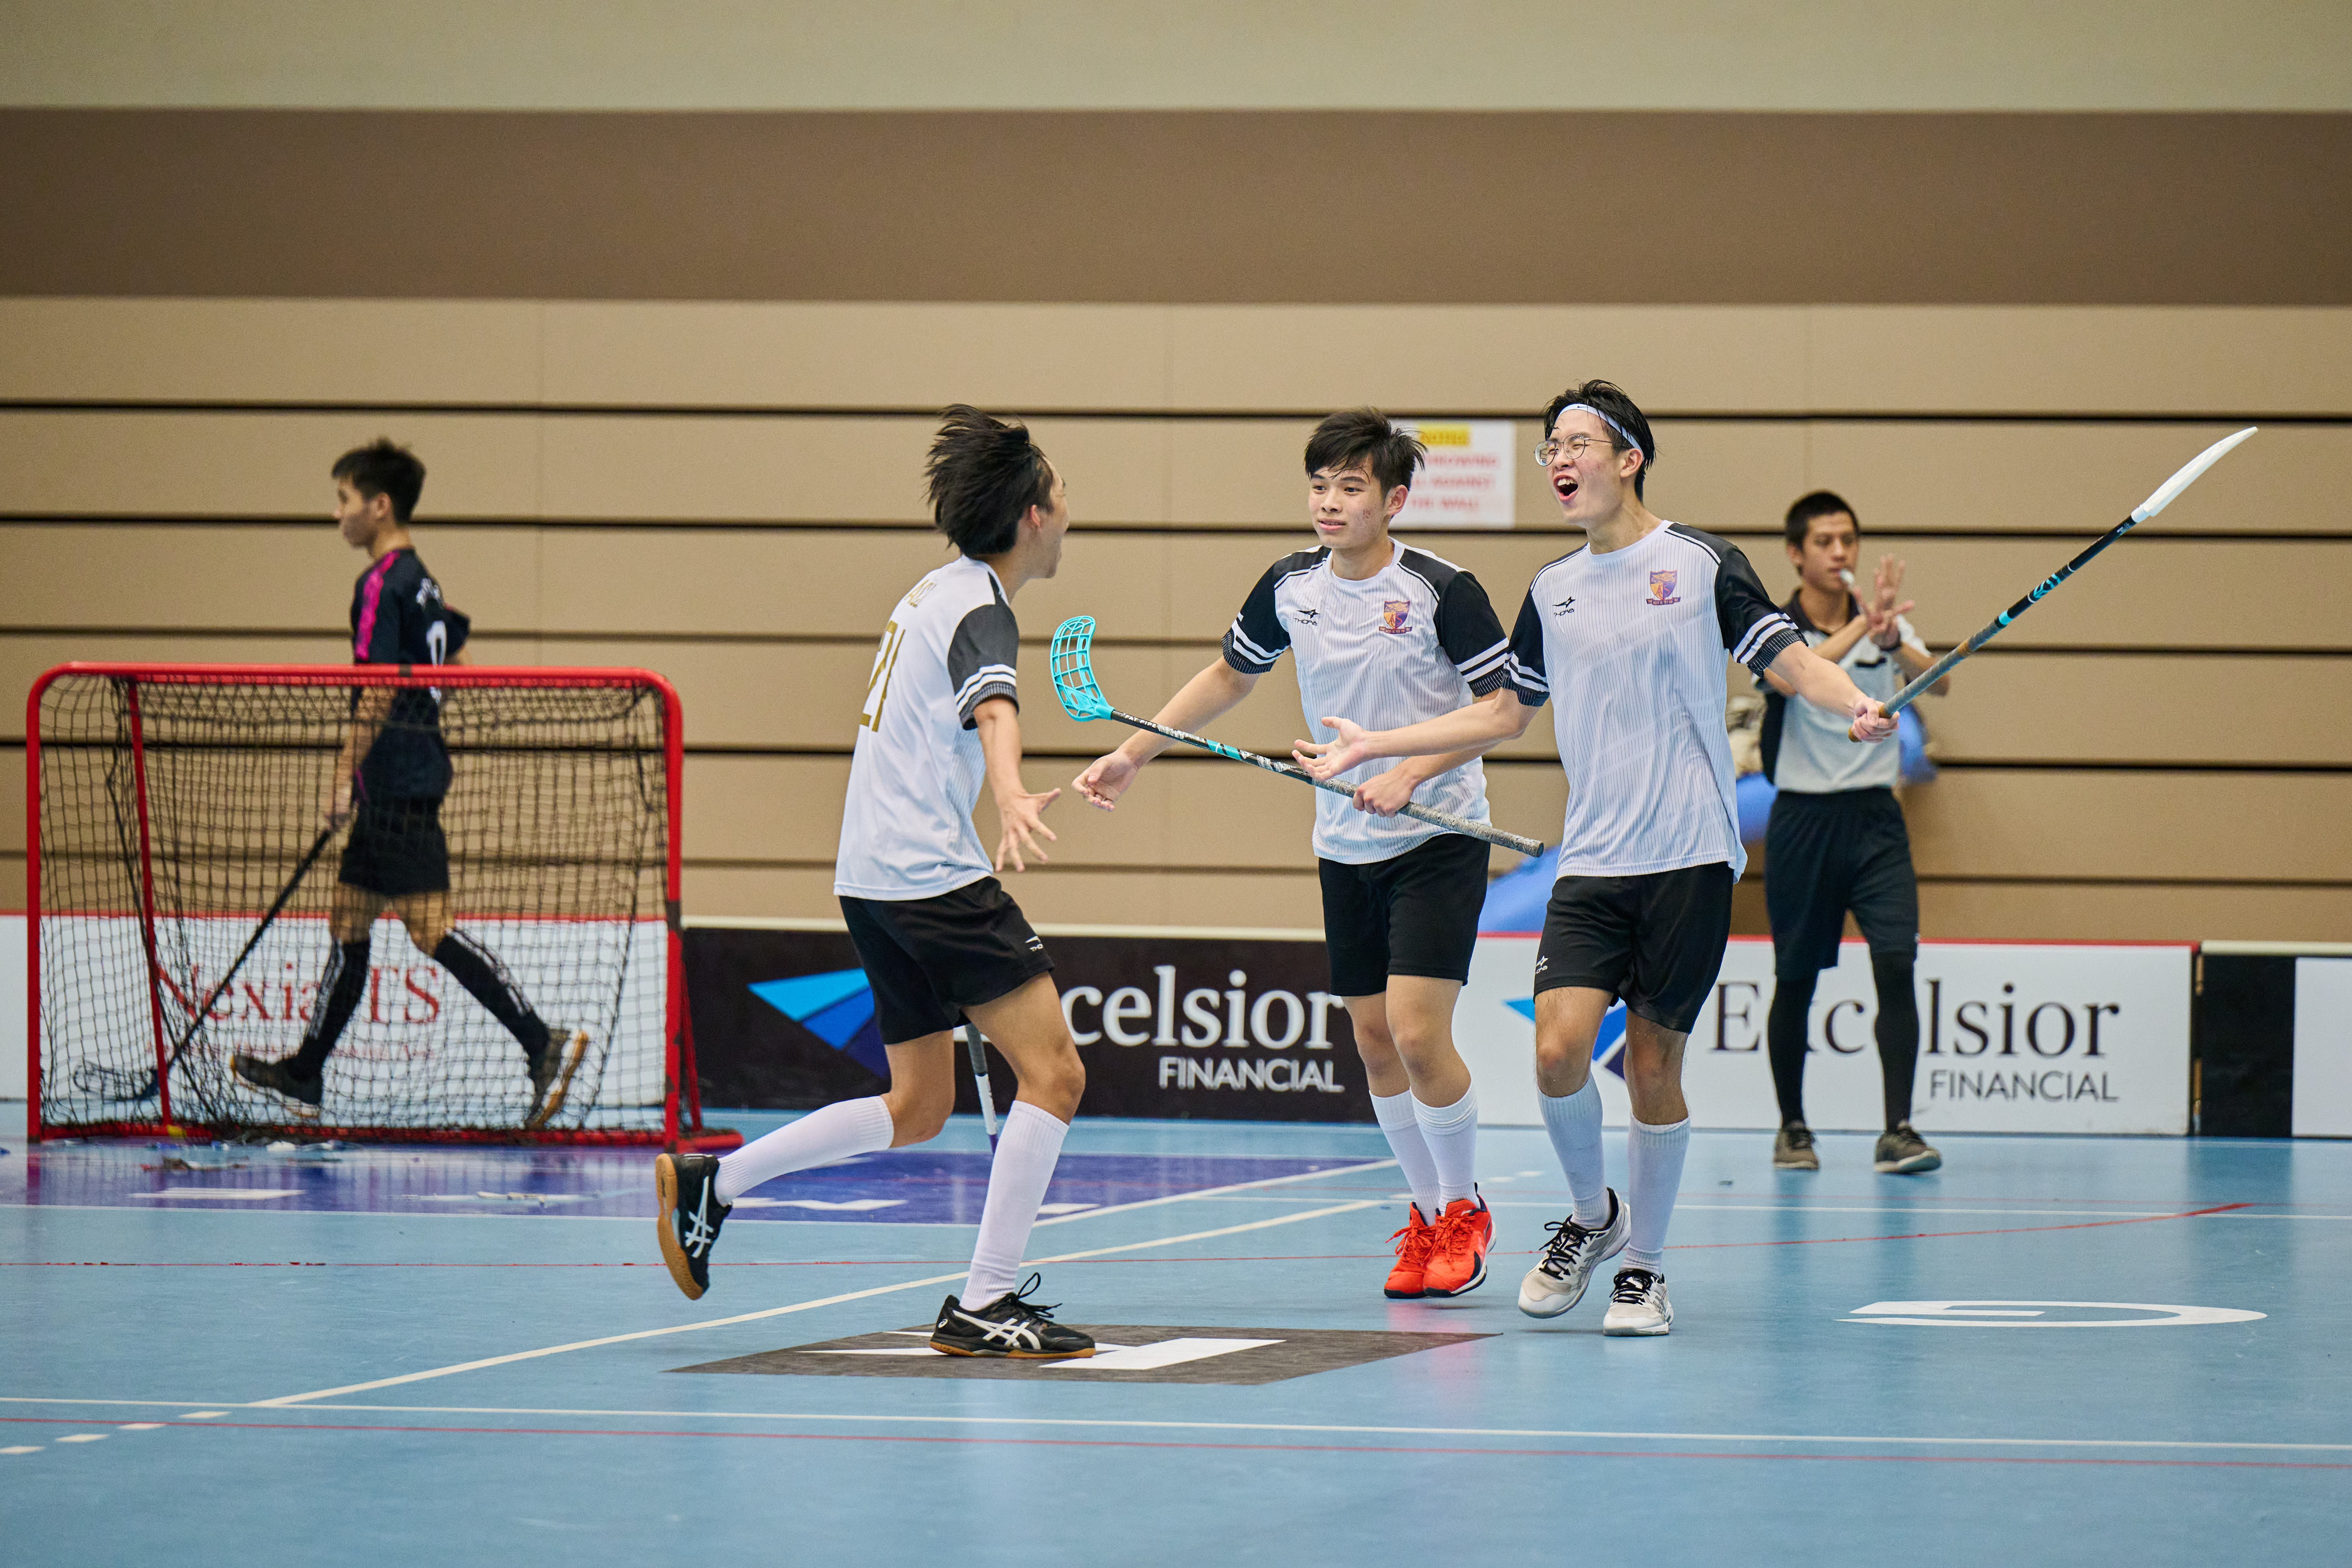 20220519_20220519 SSSC Floorball National A Div Boys Semi Finals Raffles Junior College Vs Anglo-Chinese Junior College_Siaw Woon Chong_0051